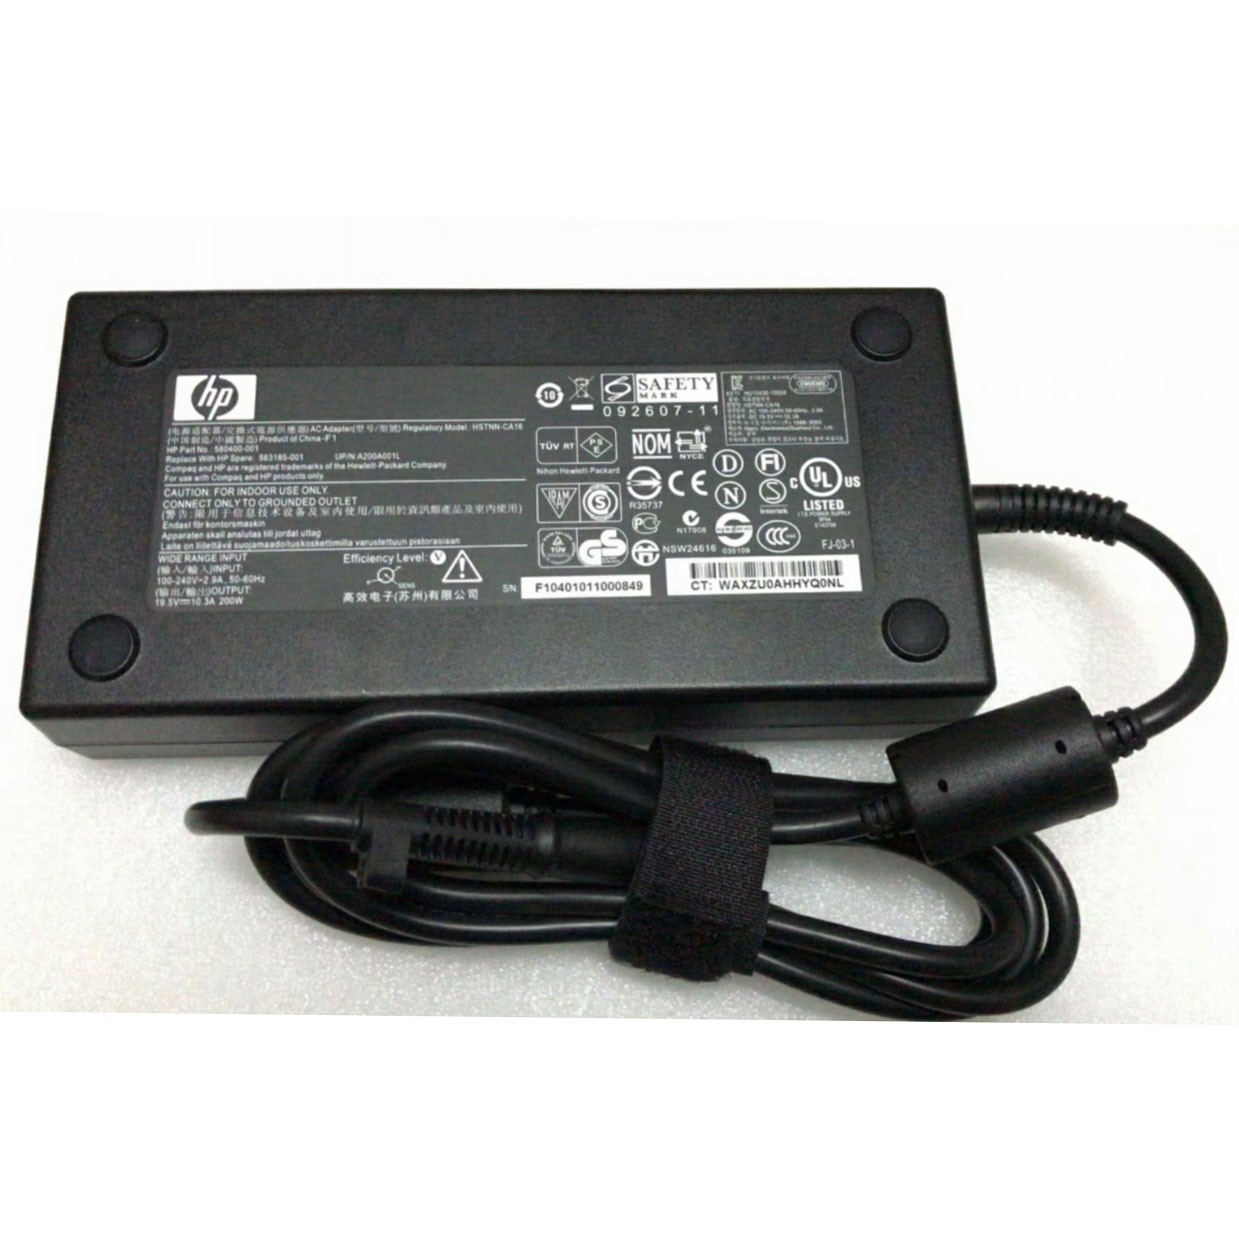 Genuine 200W HP 693708-001 AC Adapter Charger + Free Cord Laptop Power Supply Adapter Cord